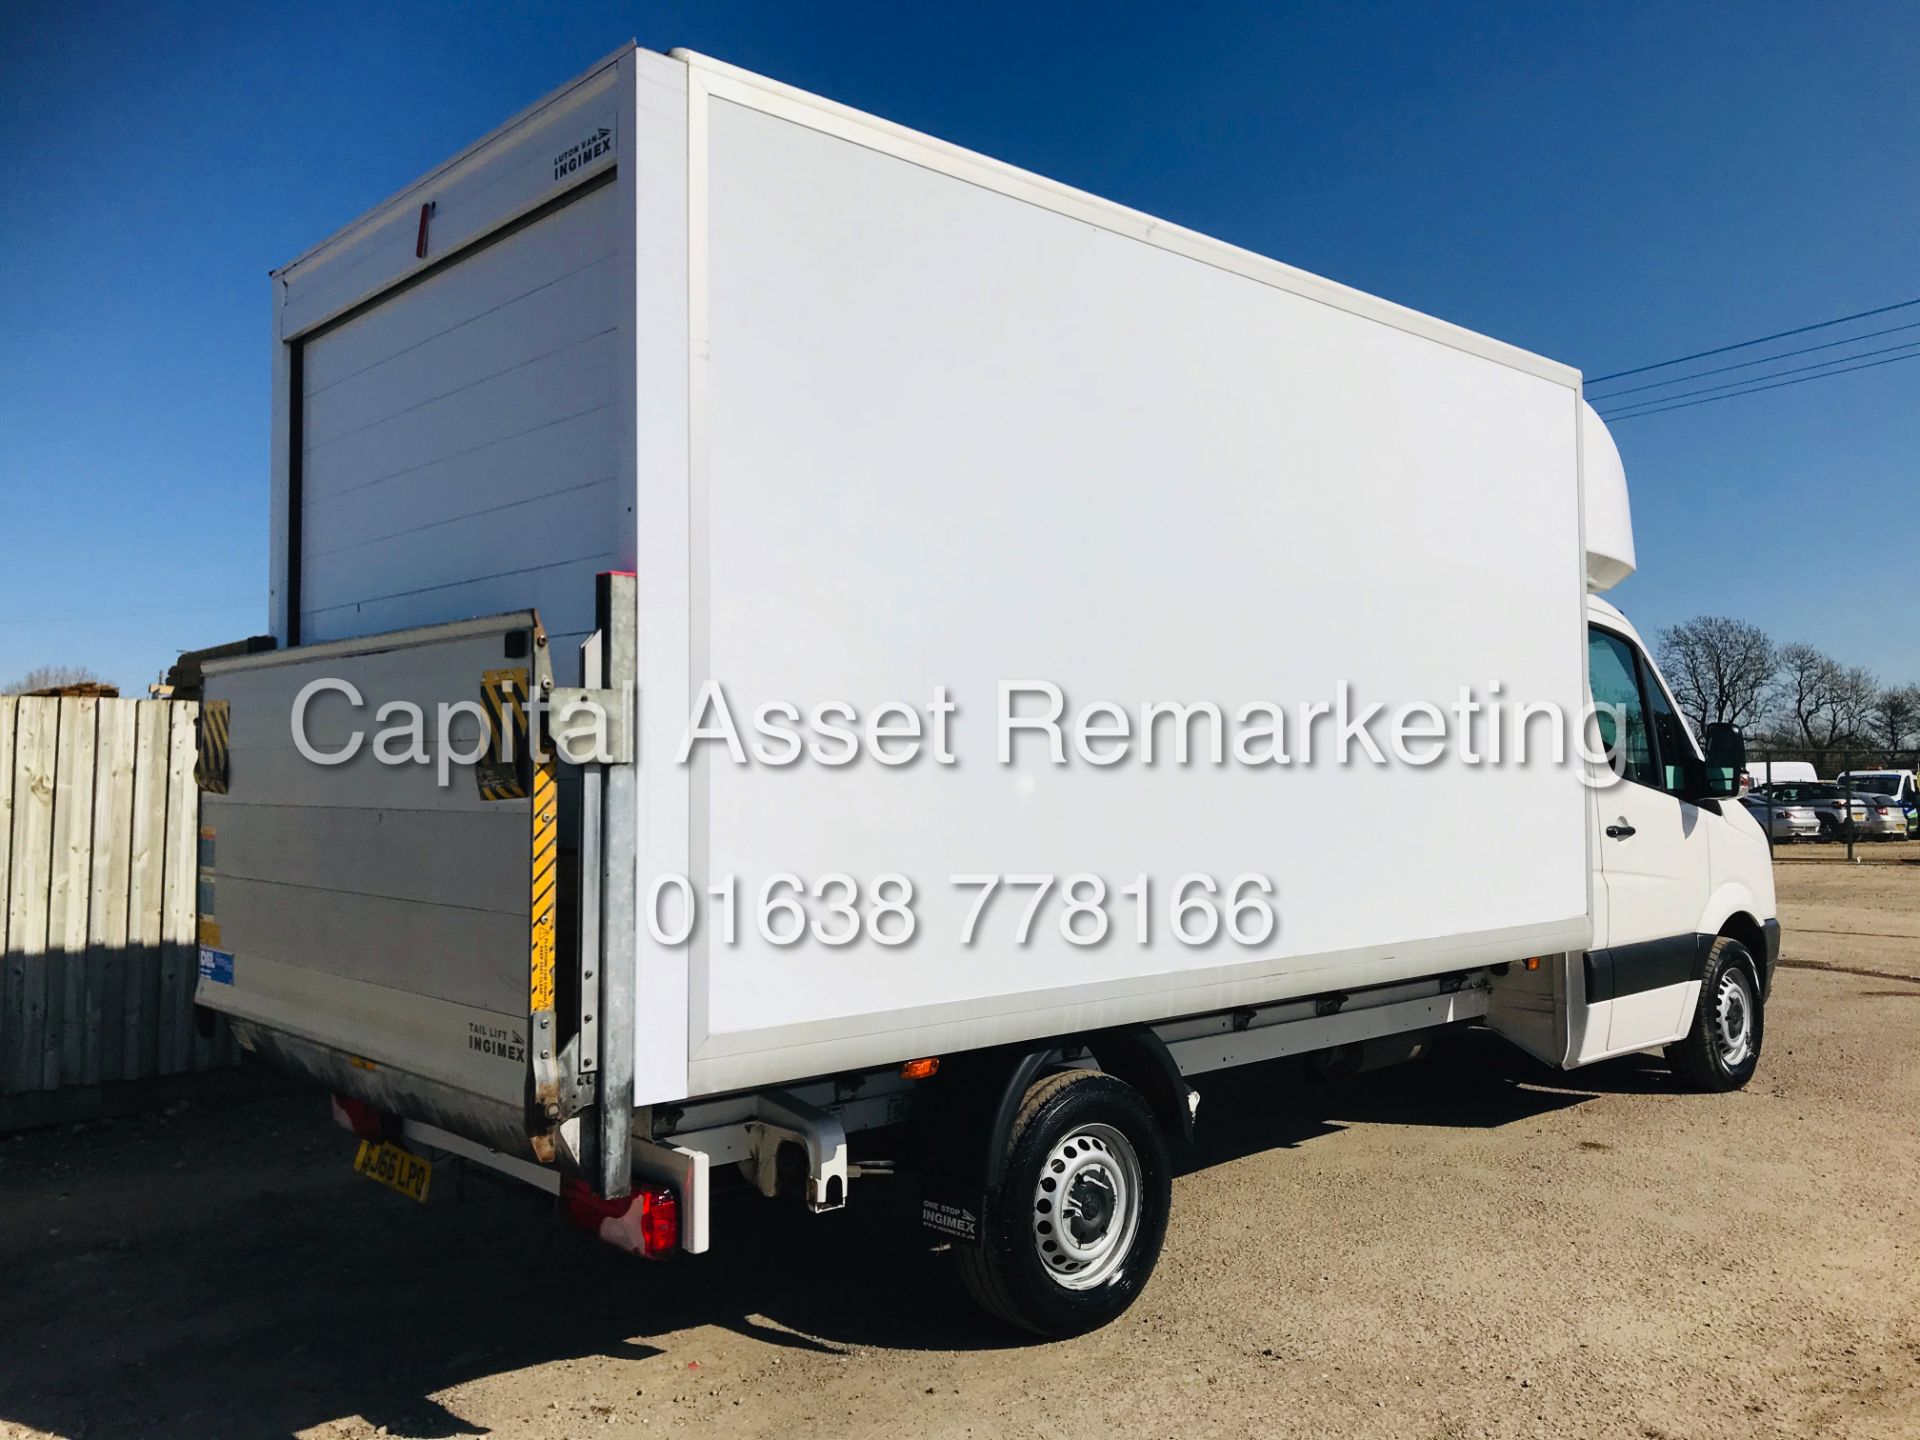 ON SALE VOLKSWAGEN CRAFTER 2.0TDI "136BHP" 14FT LUTON (2017 MODEL) TAIL LIFT (EURO 6) 1 OWNER - Image 10 of 18